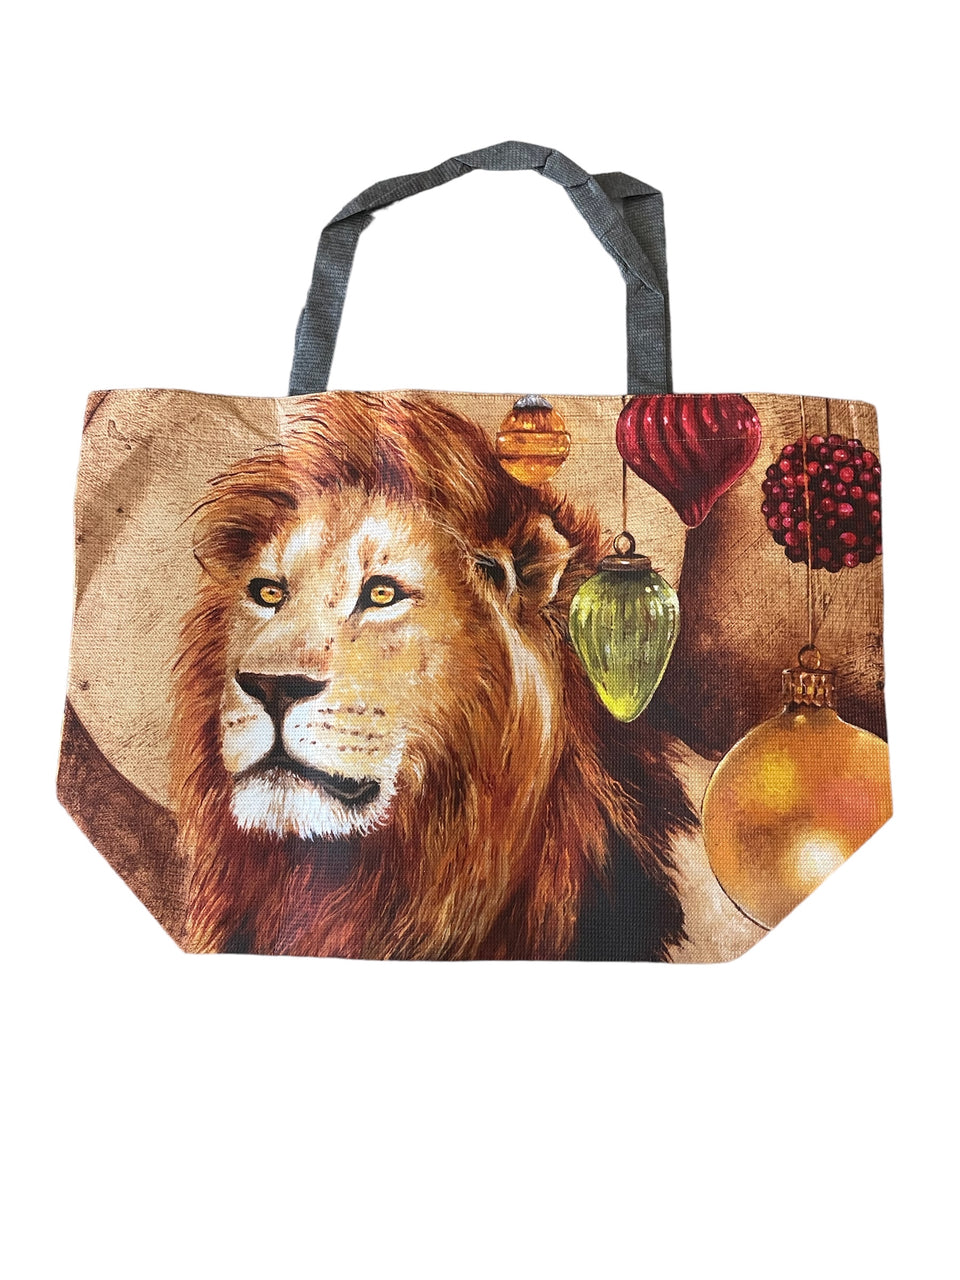 African Wildlife Christmas Recycled Large Shopper Bag